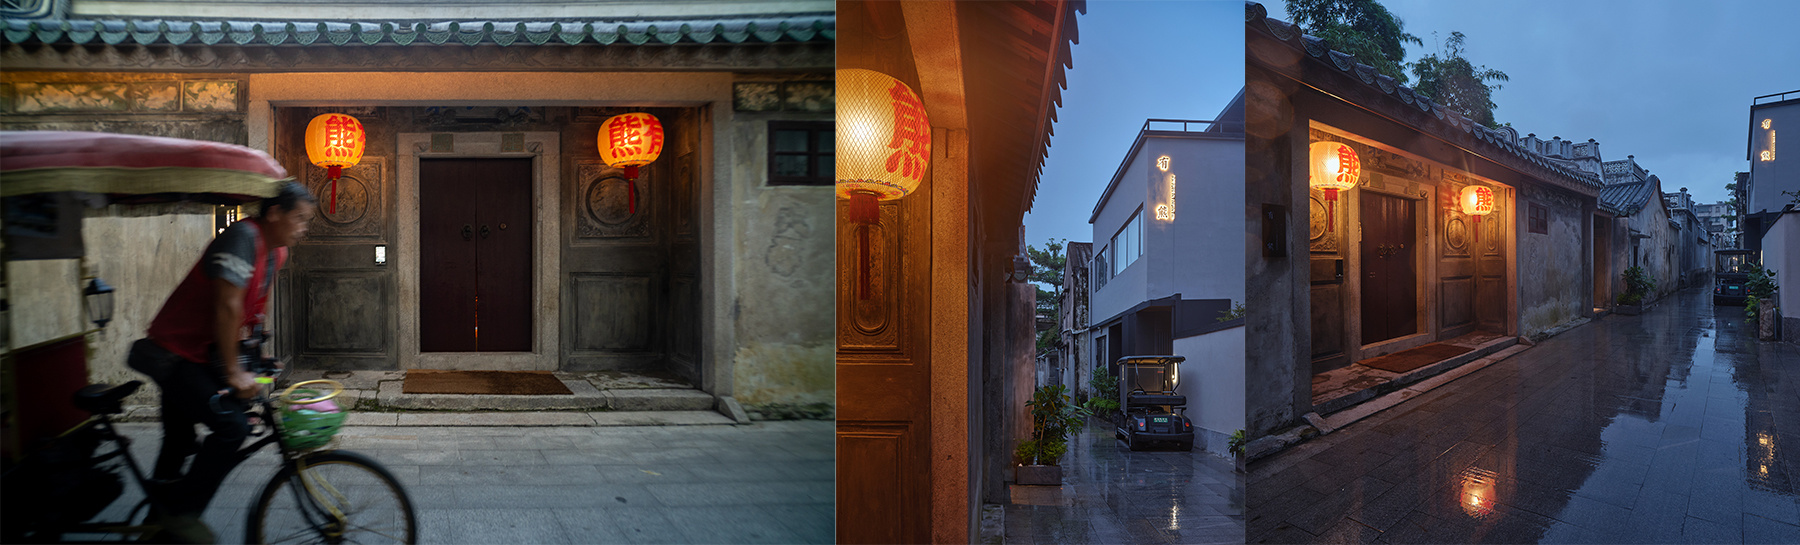 The Youxiong Hotel in Chaozhou Heritage City, Guangdong